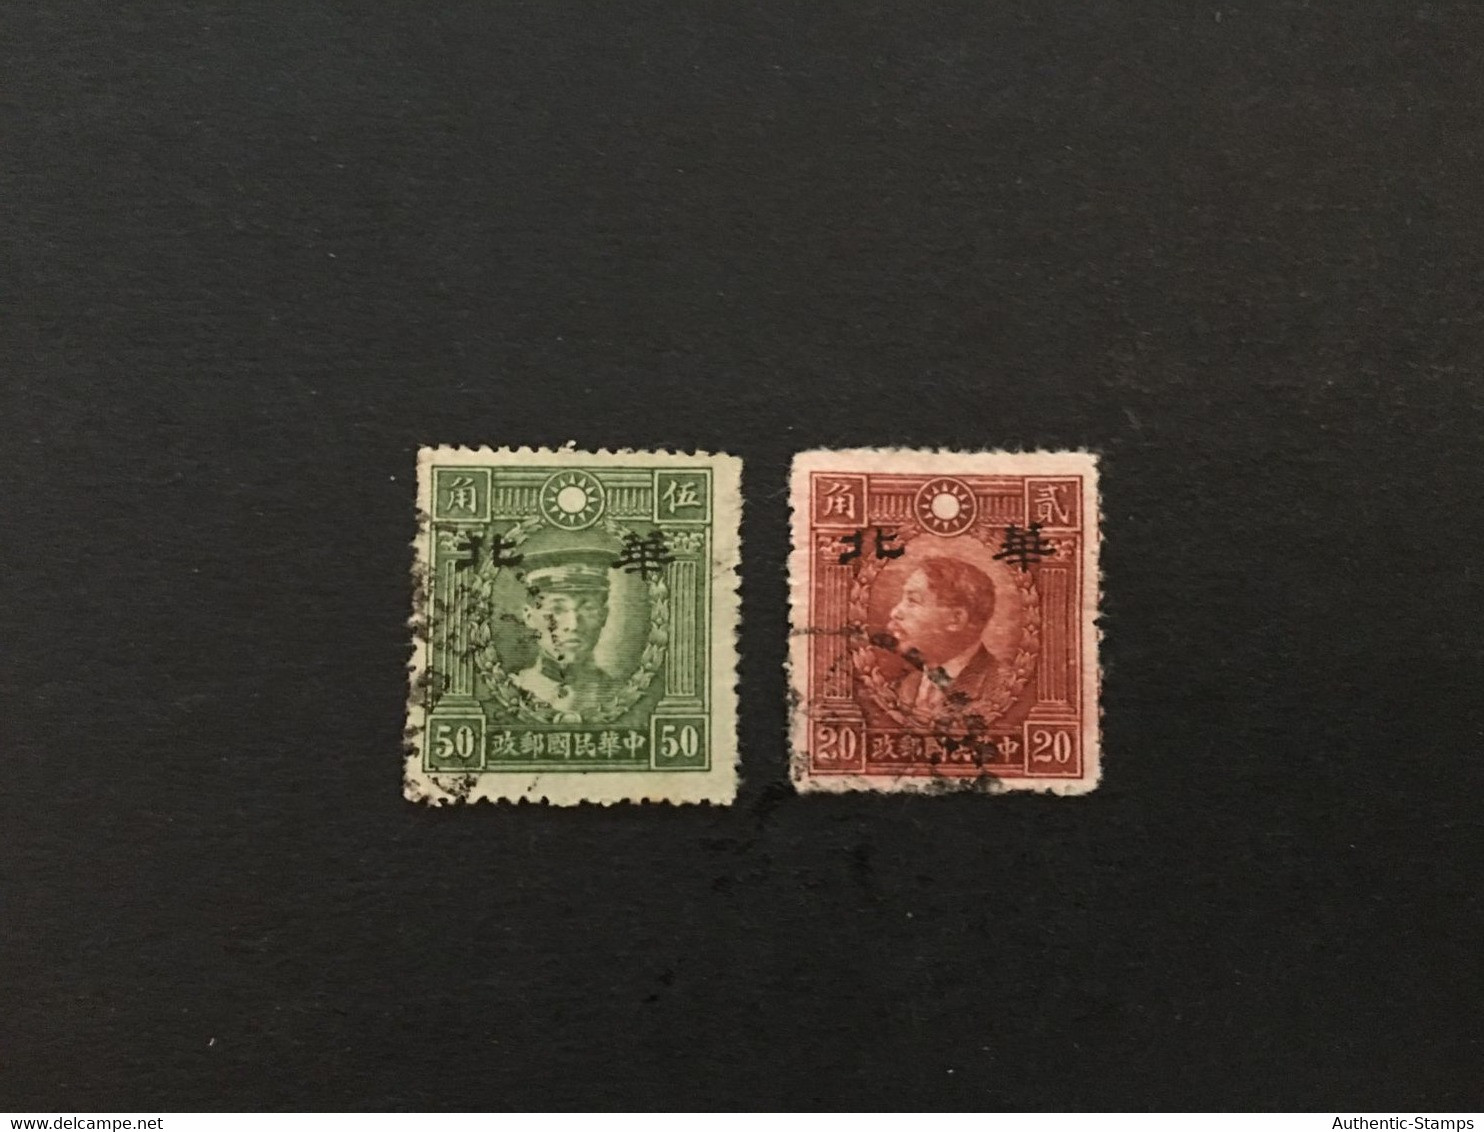 CHINA  STAMP, TIMBRO, STEMPEL, USED, CINA, CHINE, LIST 2792 - 1941-45 Nordchina